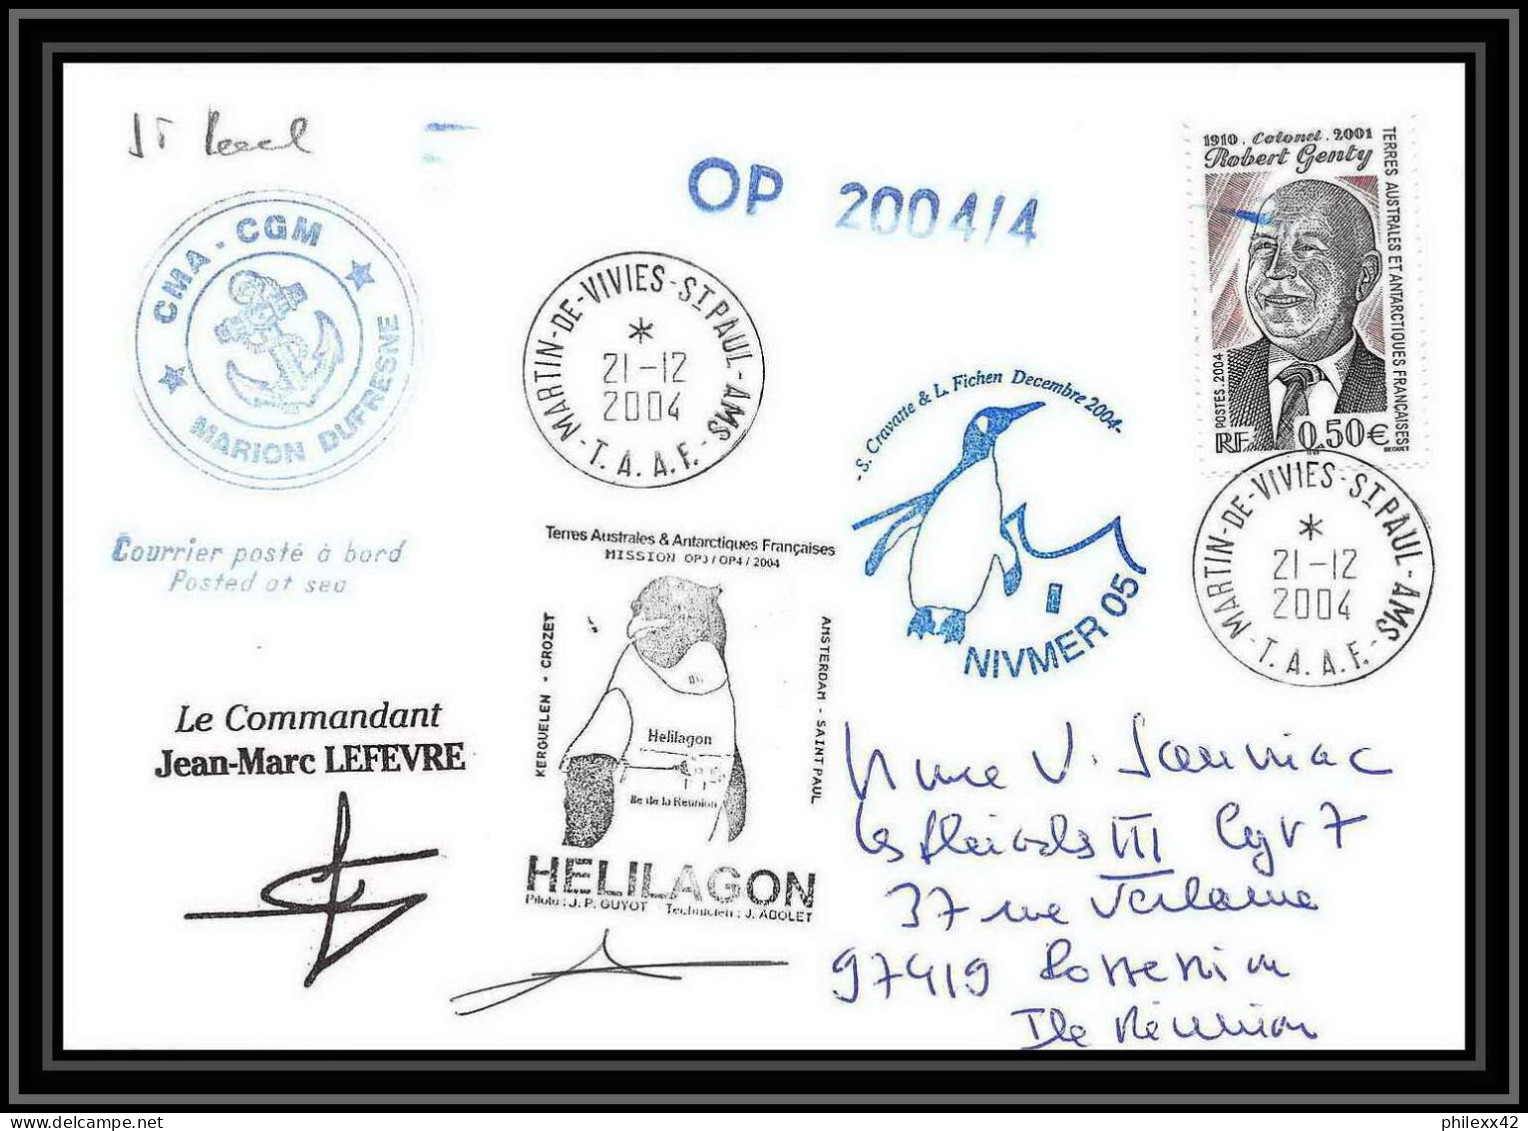 2480 ANTARCTIC Terres Australes TAAF Lettre Cover Dufresne 2 Signé Signed OP 2004/4 N°392 21/12/2004 Helilagon - Elicotteri